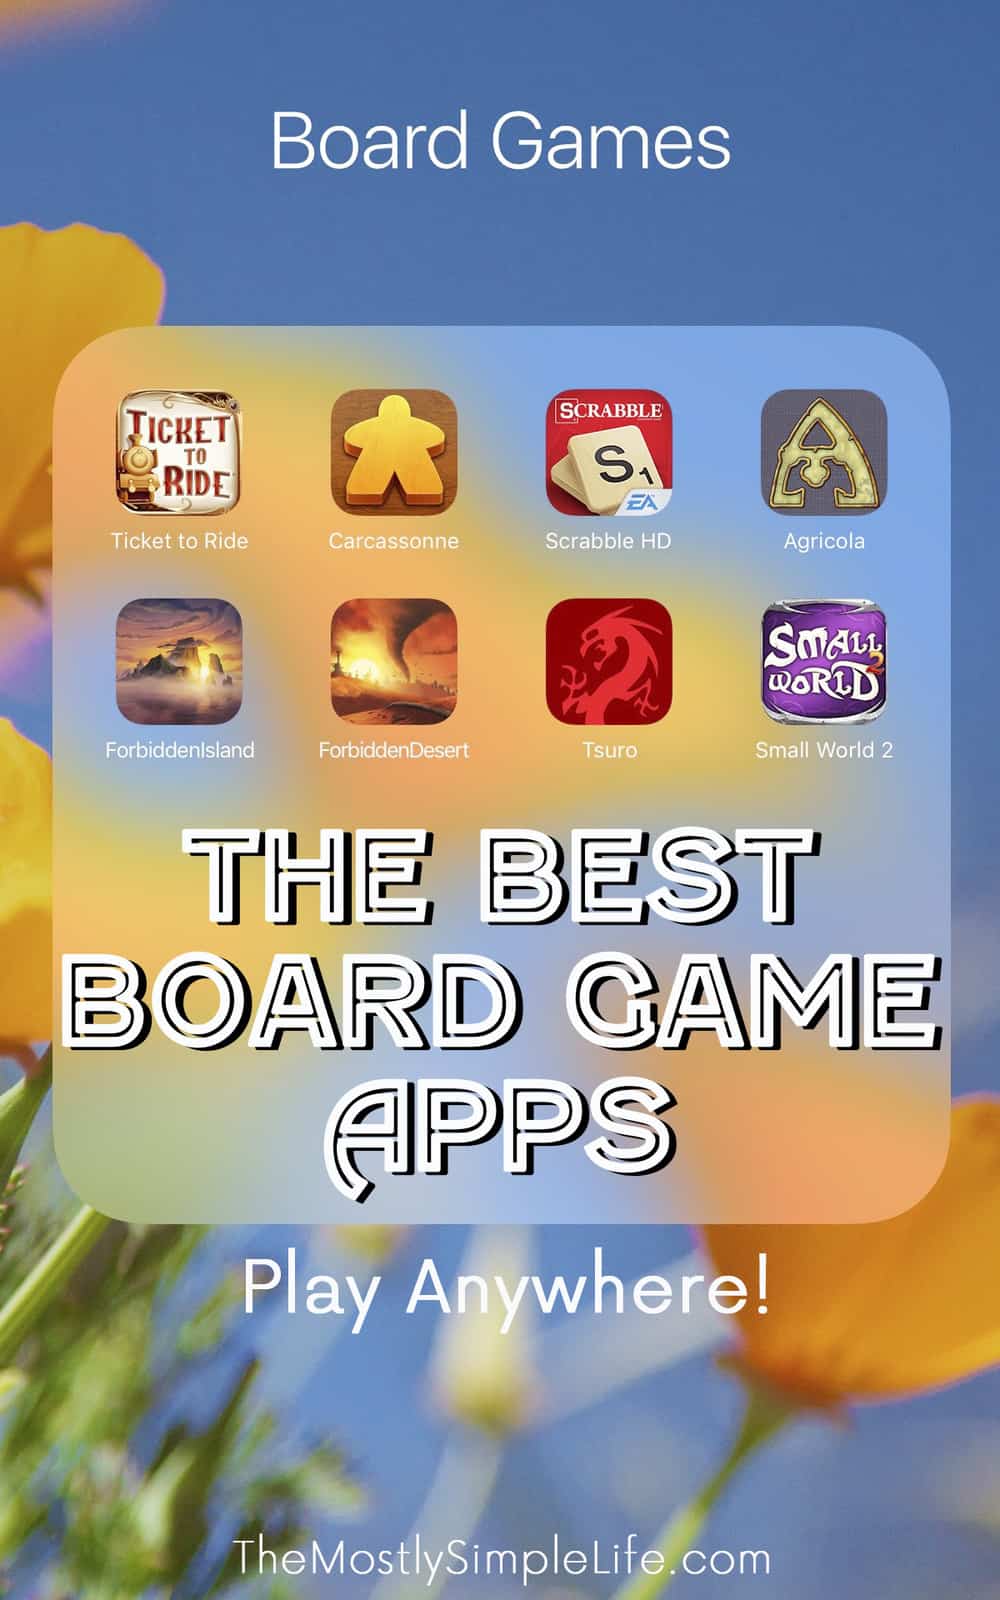 36 Top Pictures Best Board Game Apps Reddit : The best board games for Android | Android Central